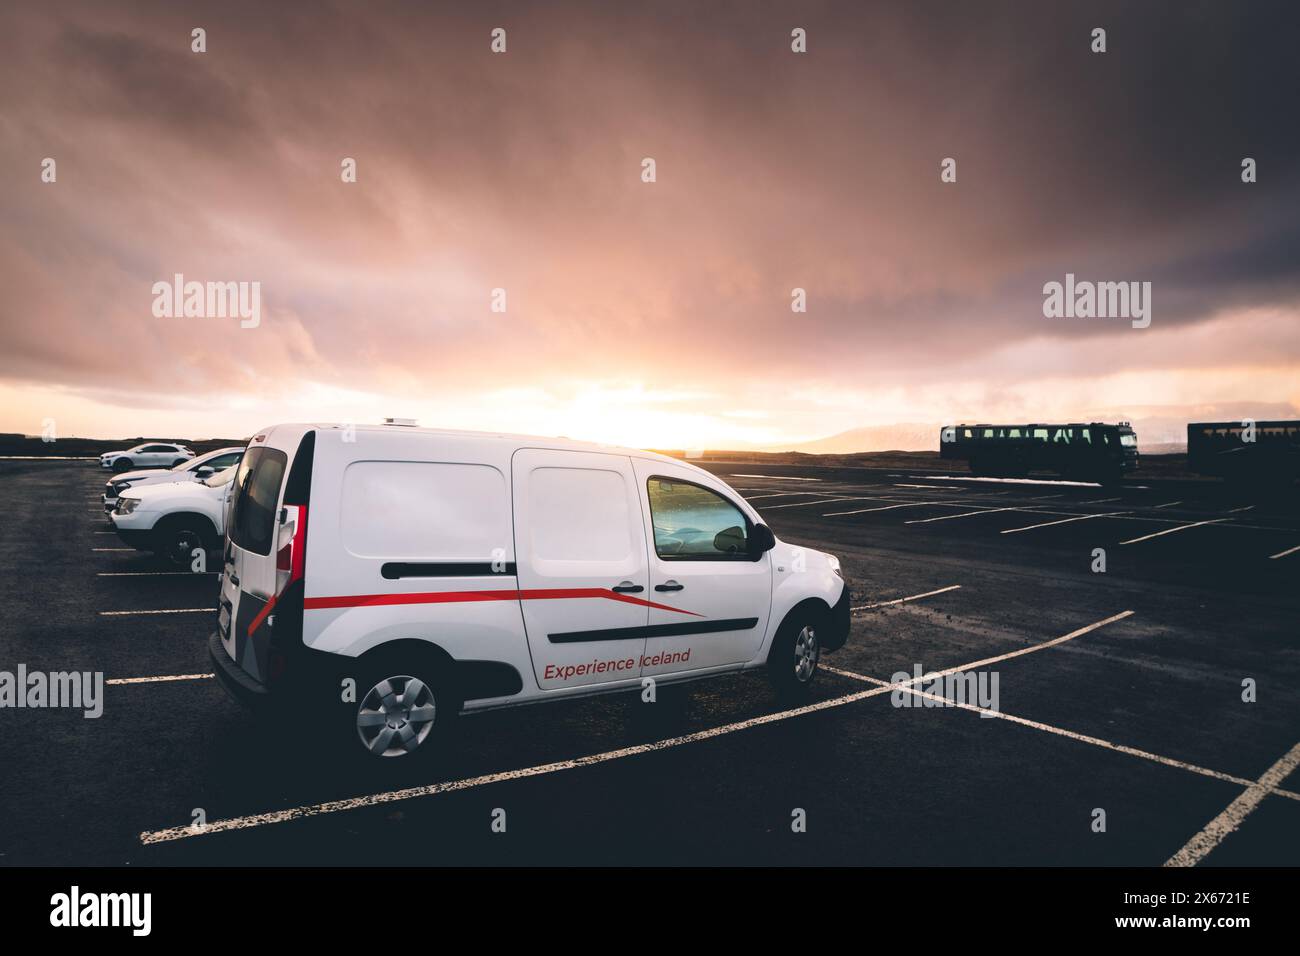 Reykjavik, Iceland - march 15th, 2023: white camper van stand in parking lot in Iceland with sunset background Stock Photo